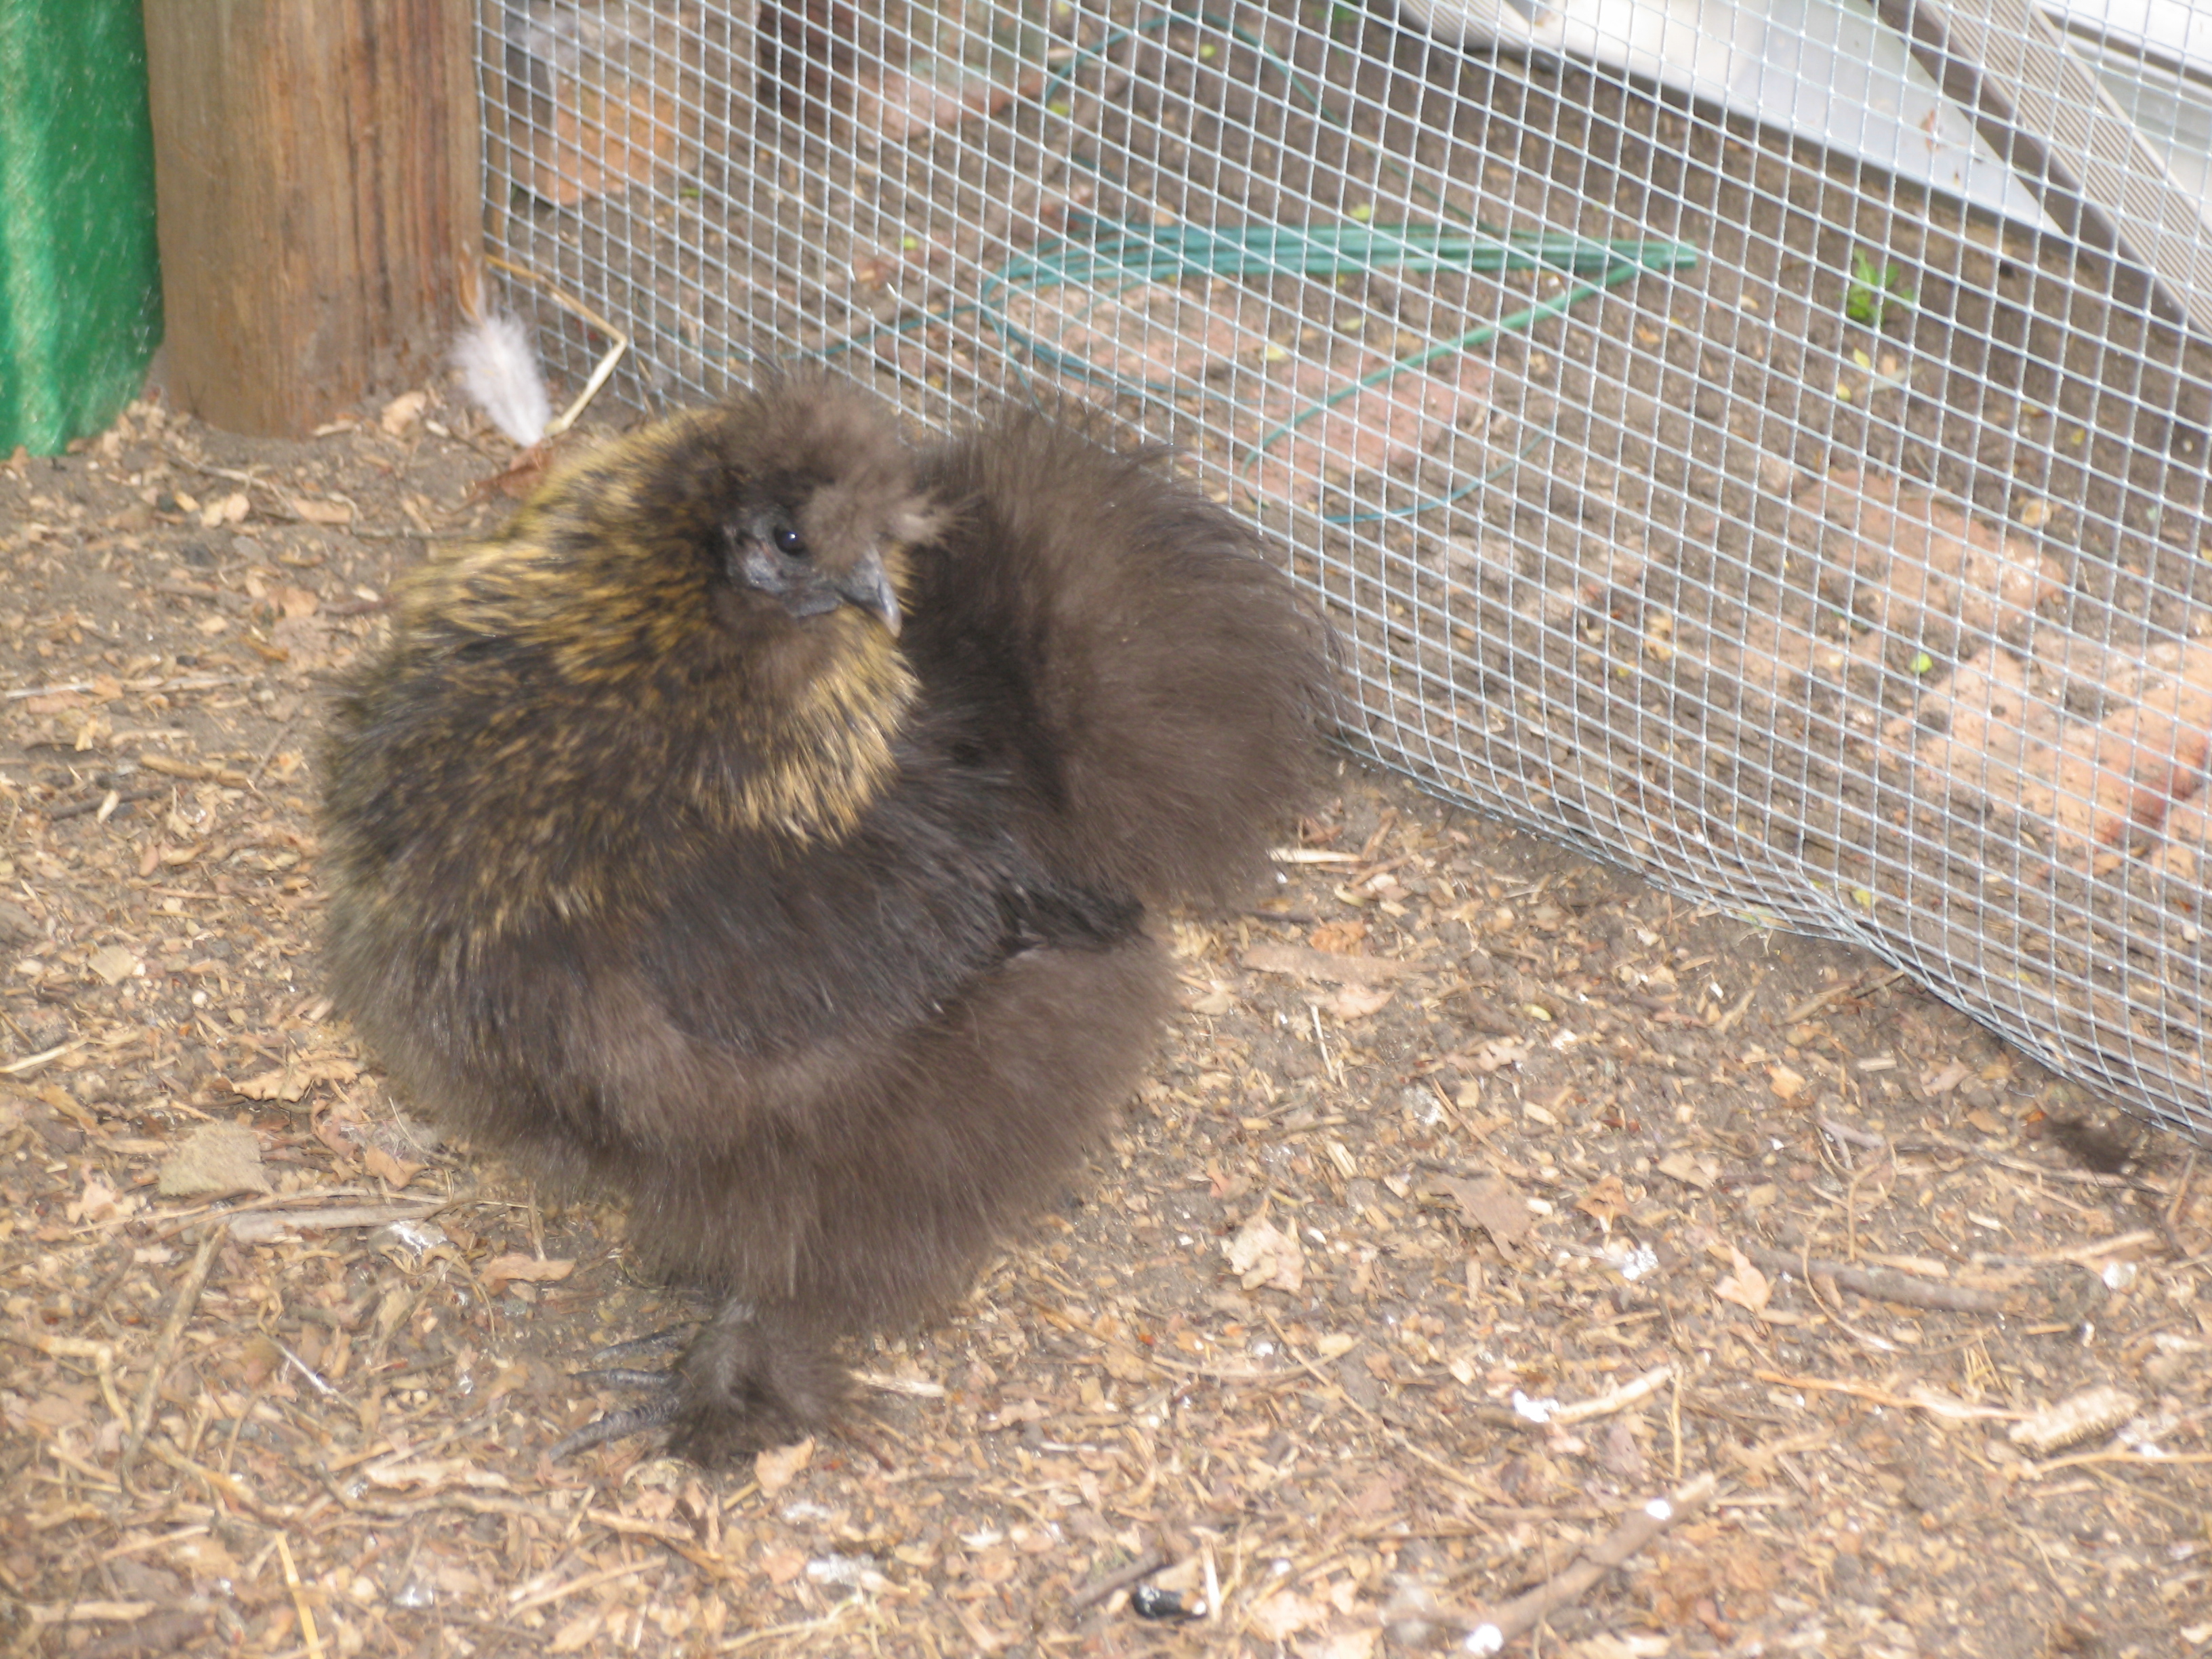 My silkie hen with her gold pencilled feathers. My foster granddaughter named her Goldilocks.